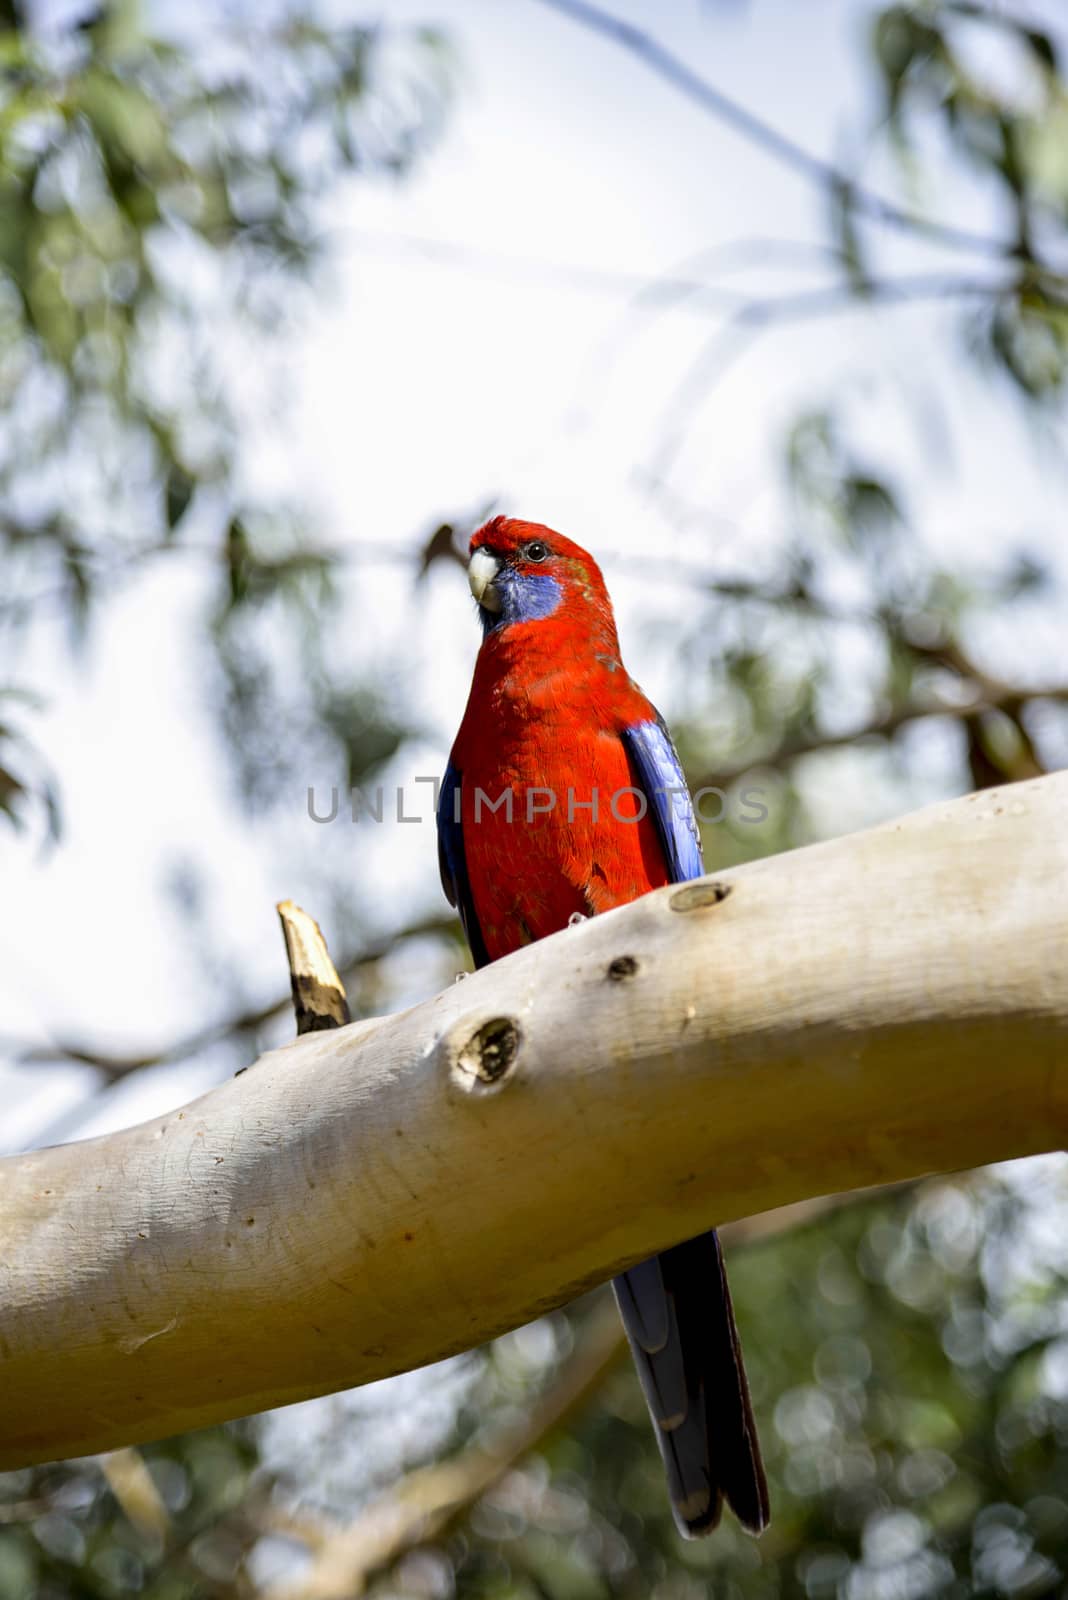 Red parot on the tree2